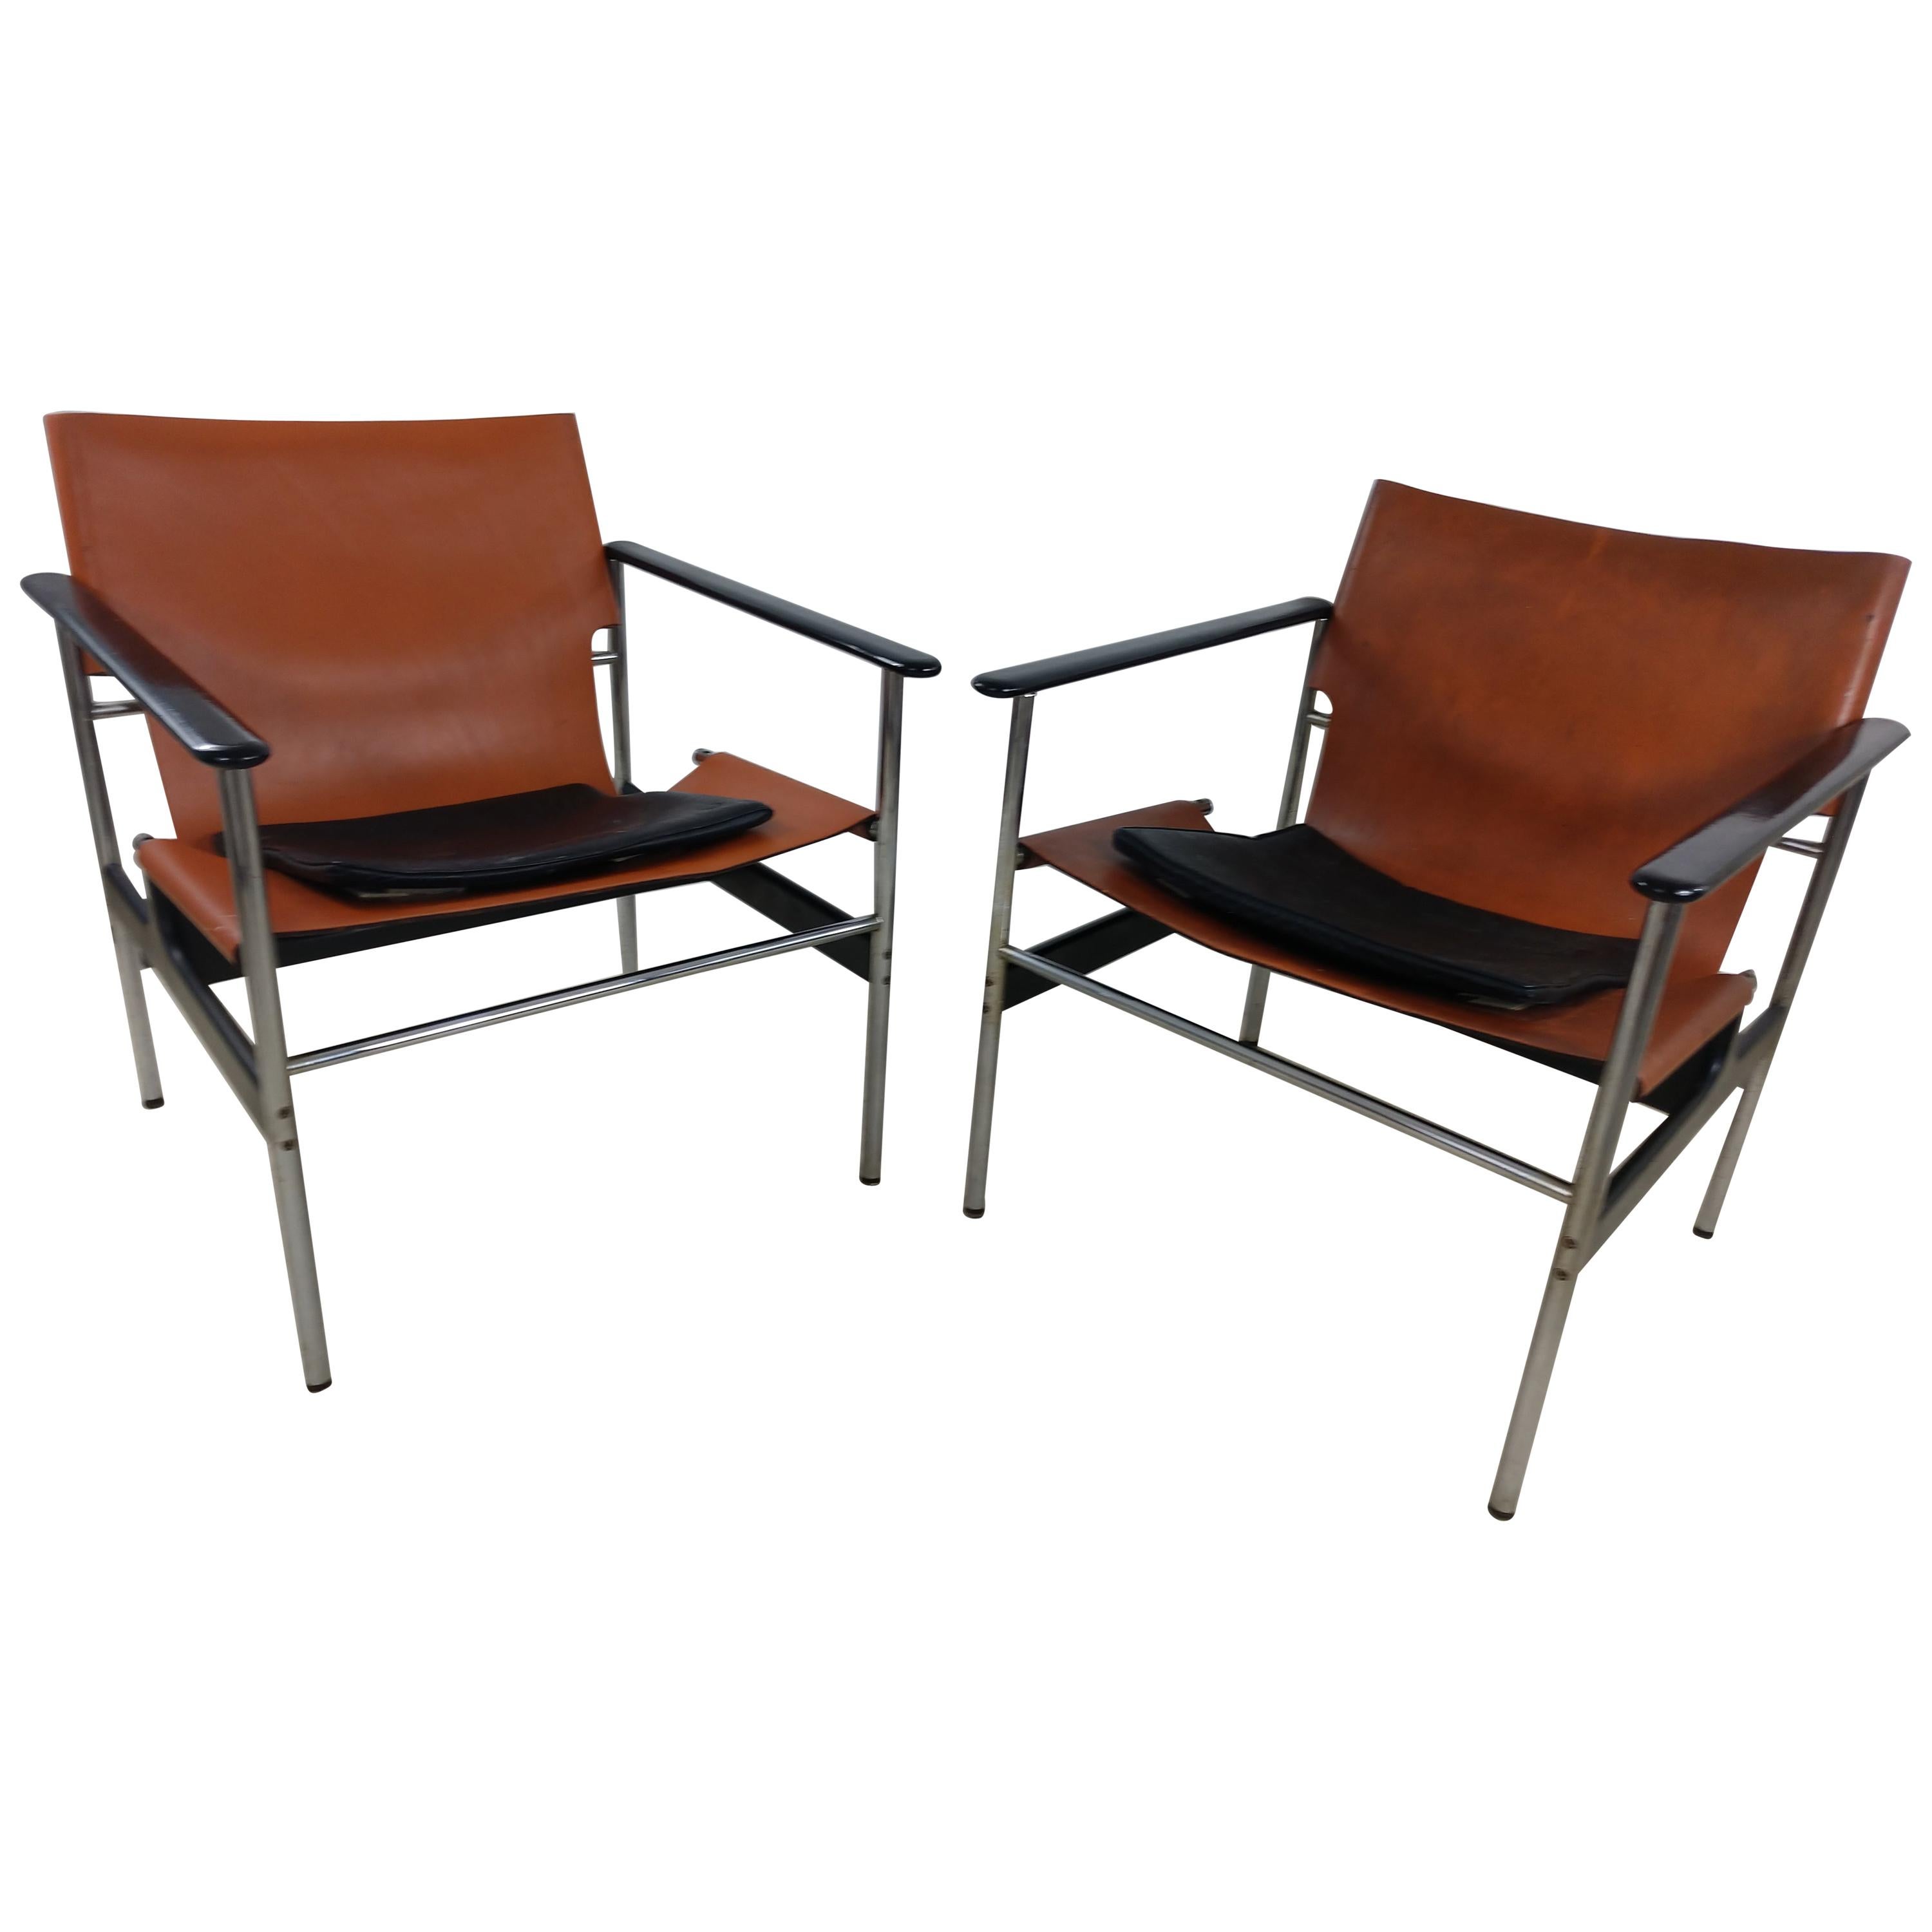 Pair of Mid-Century Modern 657 Lounge by Charles Pollock for Knoll